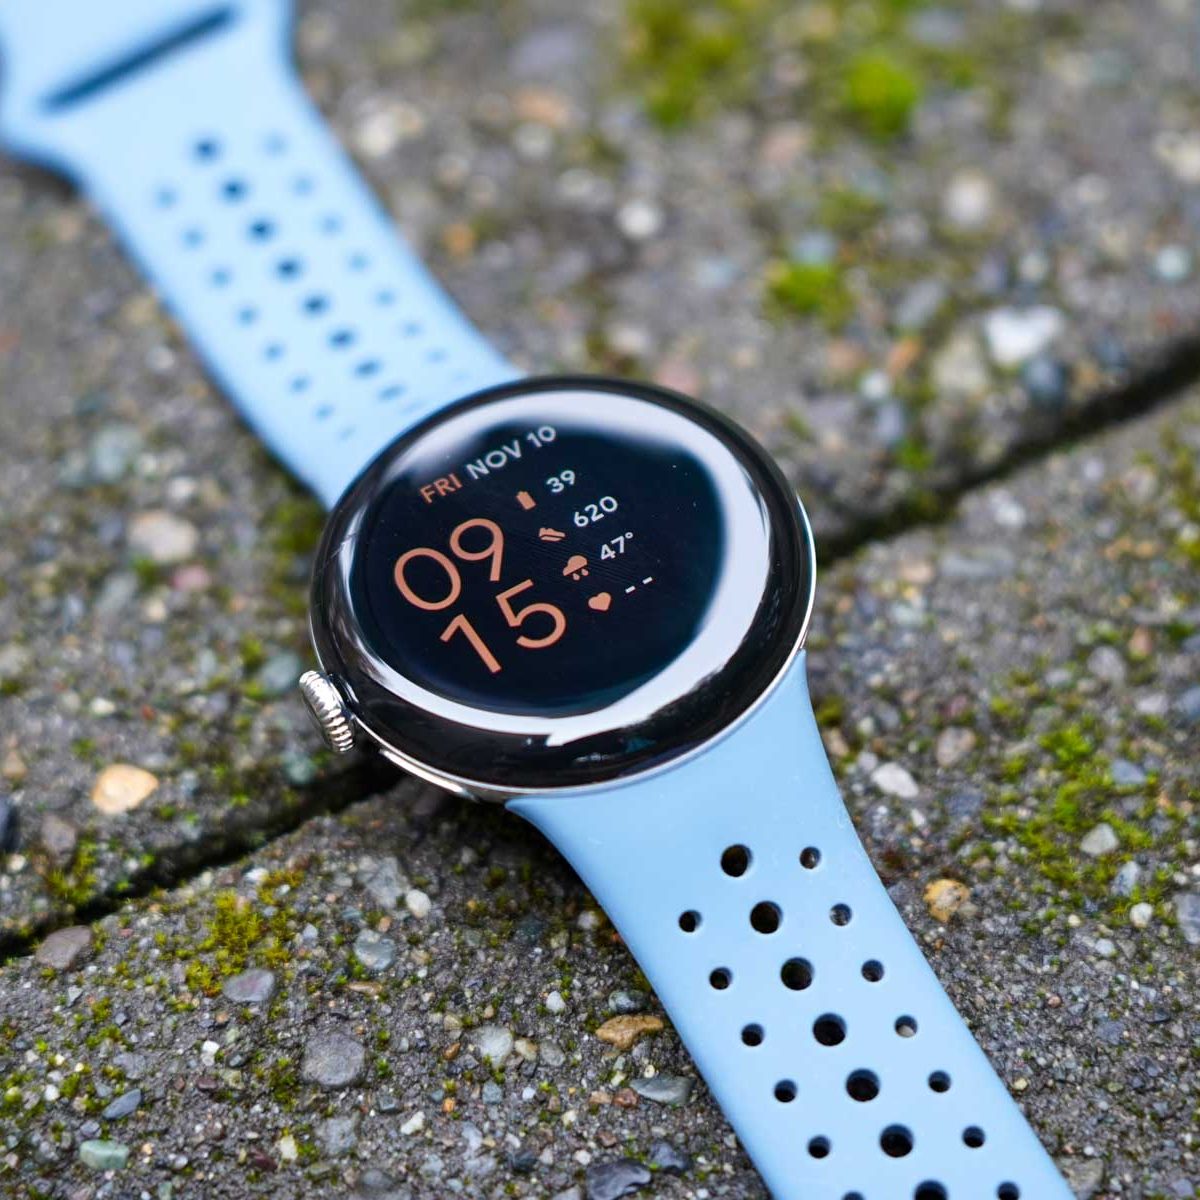 This Garmin smartwatch convinced my daughter to switch over from Fitbit